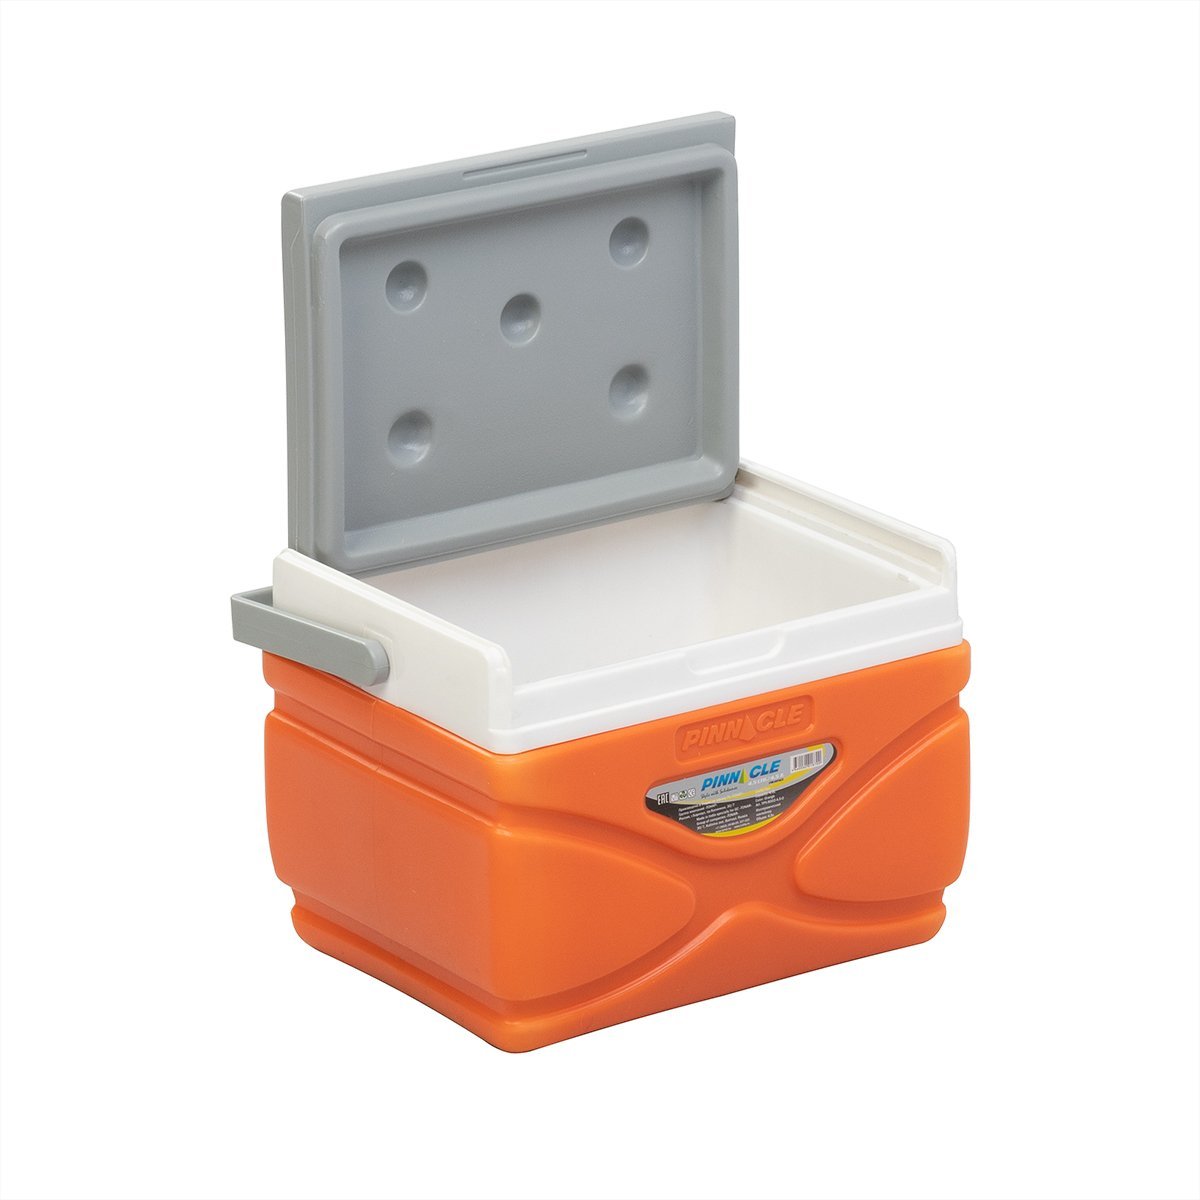 Prudence Portable Hard-Sided Ice Chest for Camping, 4 qt, with handle, orange color with a lid widely open